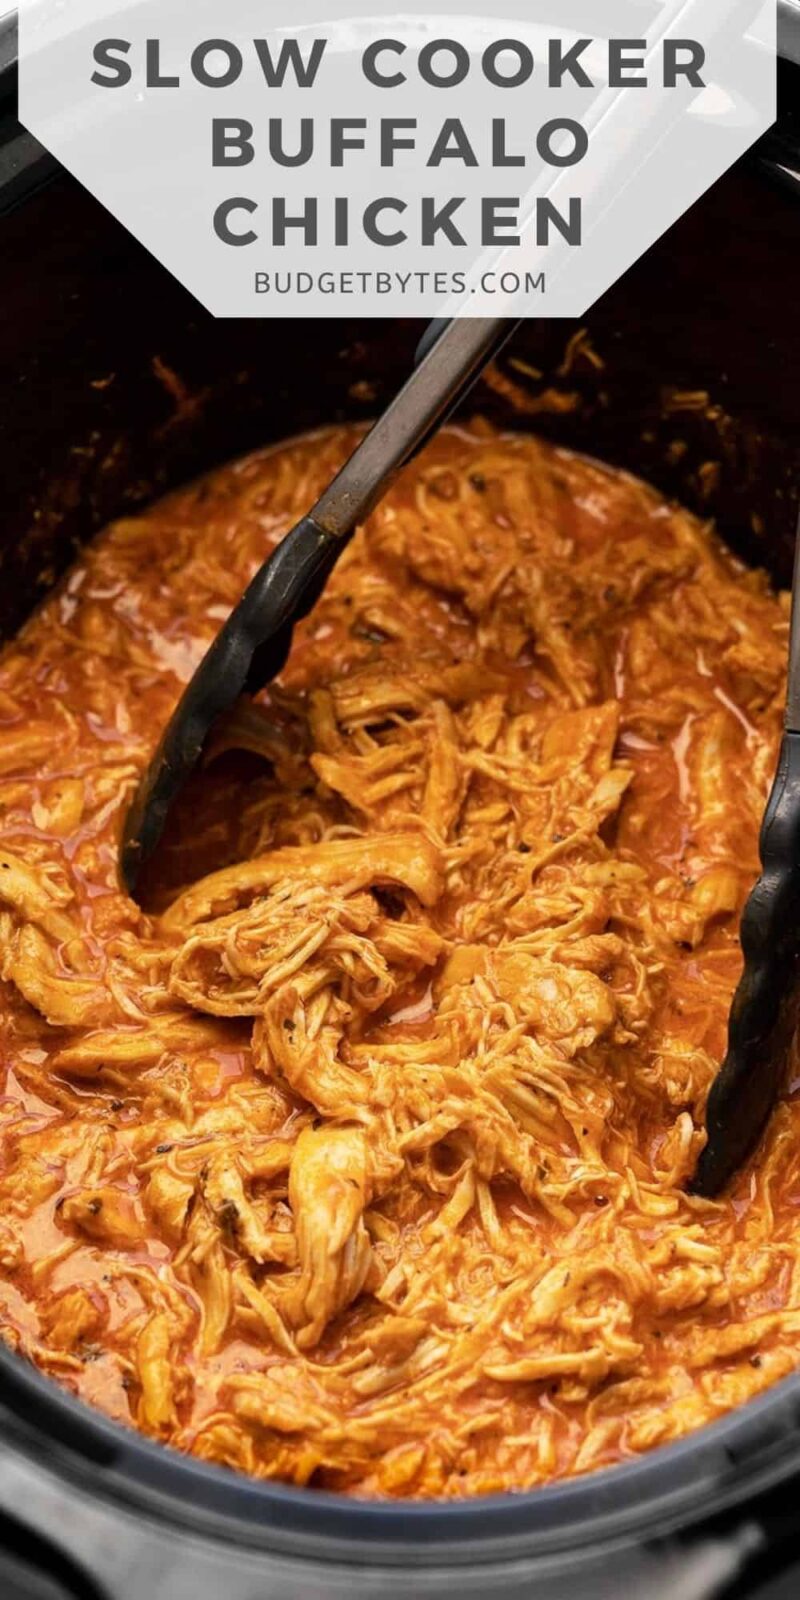 close up of slow cooker buffalo chicken in the crock pot, title text at the top